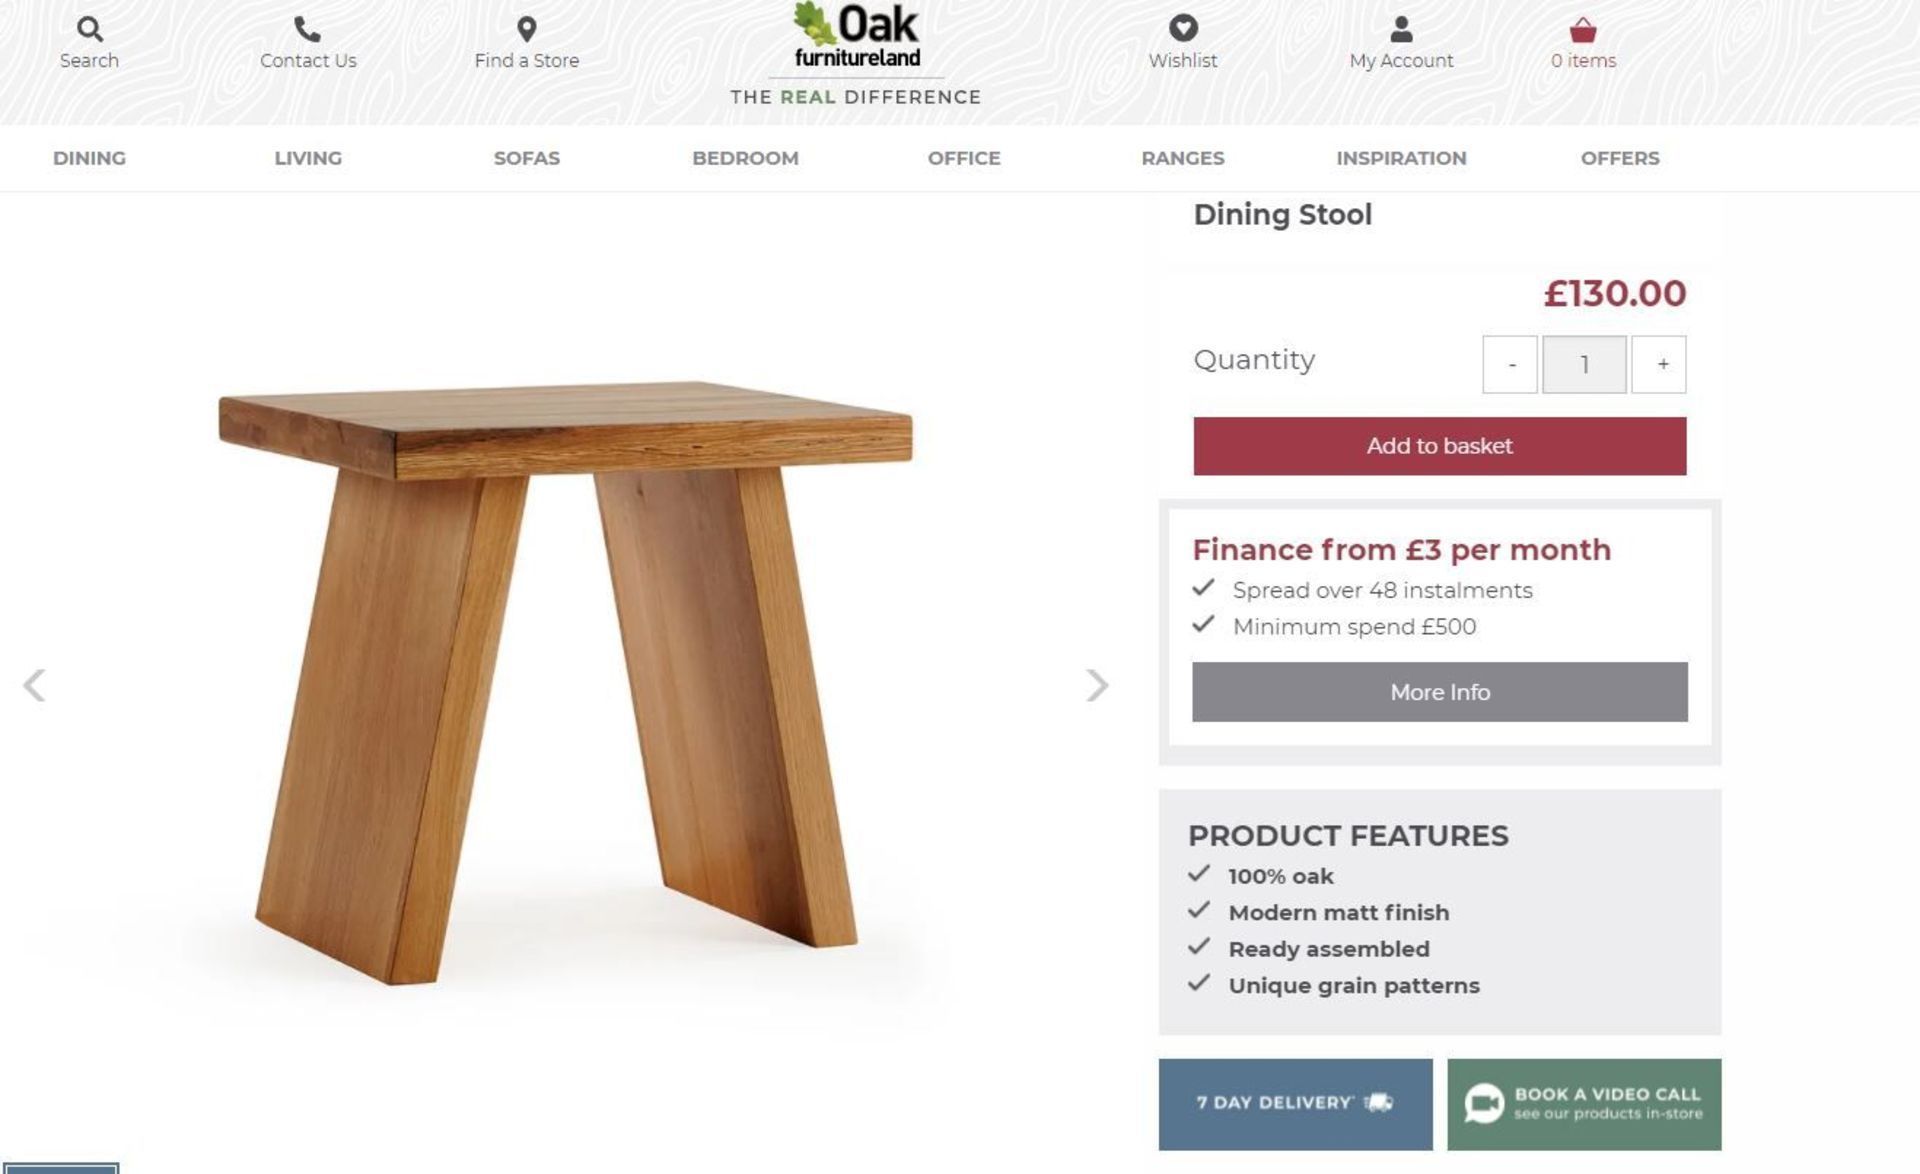 2 X NEW BOXED Natural Solid Oak Stool. RRP £130 EACH, TOTAL RRP £260.(NCH001STN) For a more open